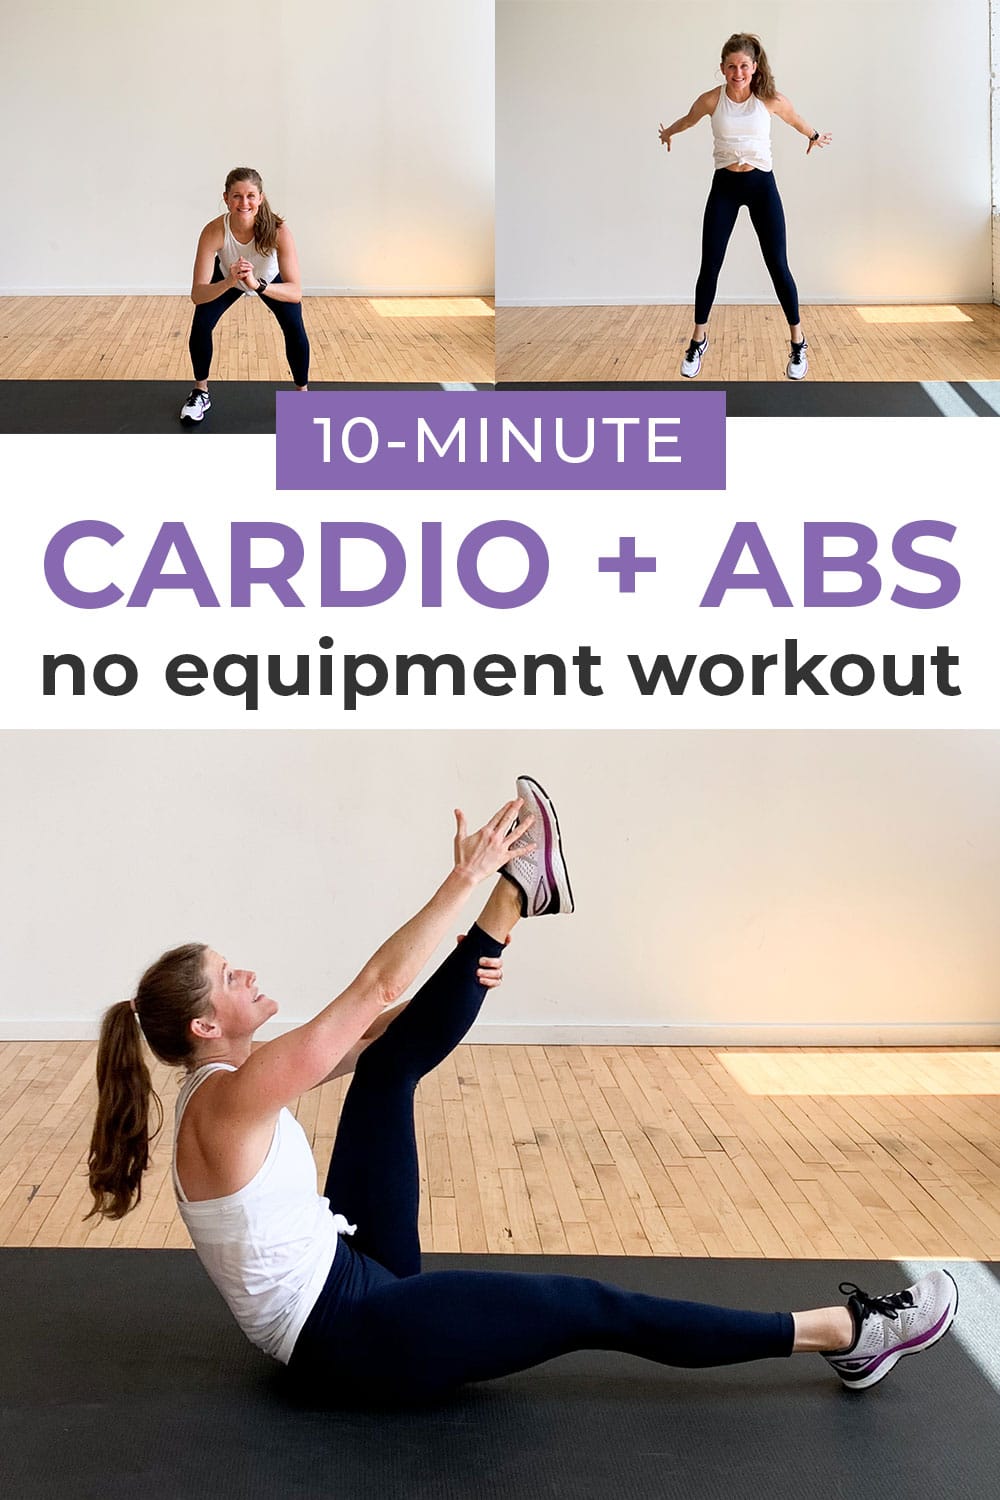 6 Day Cardio Workout No Equipment Video for Gym